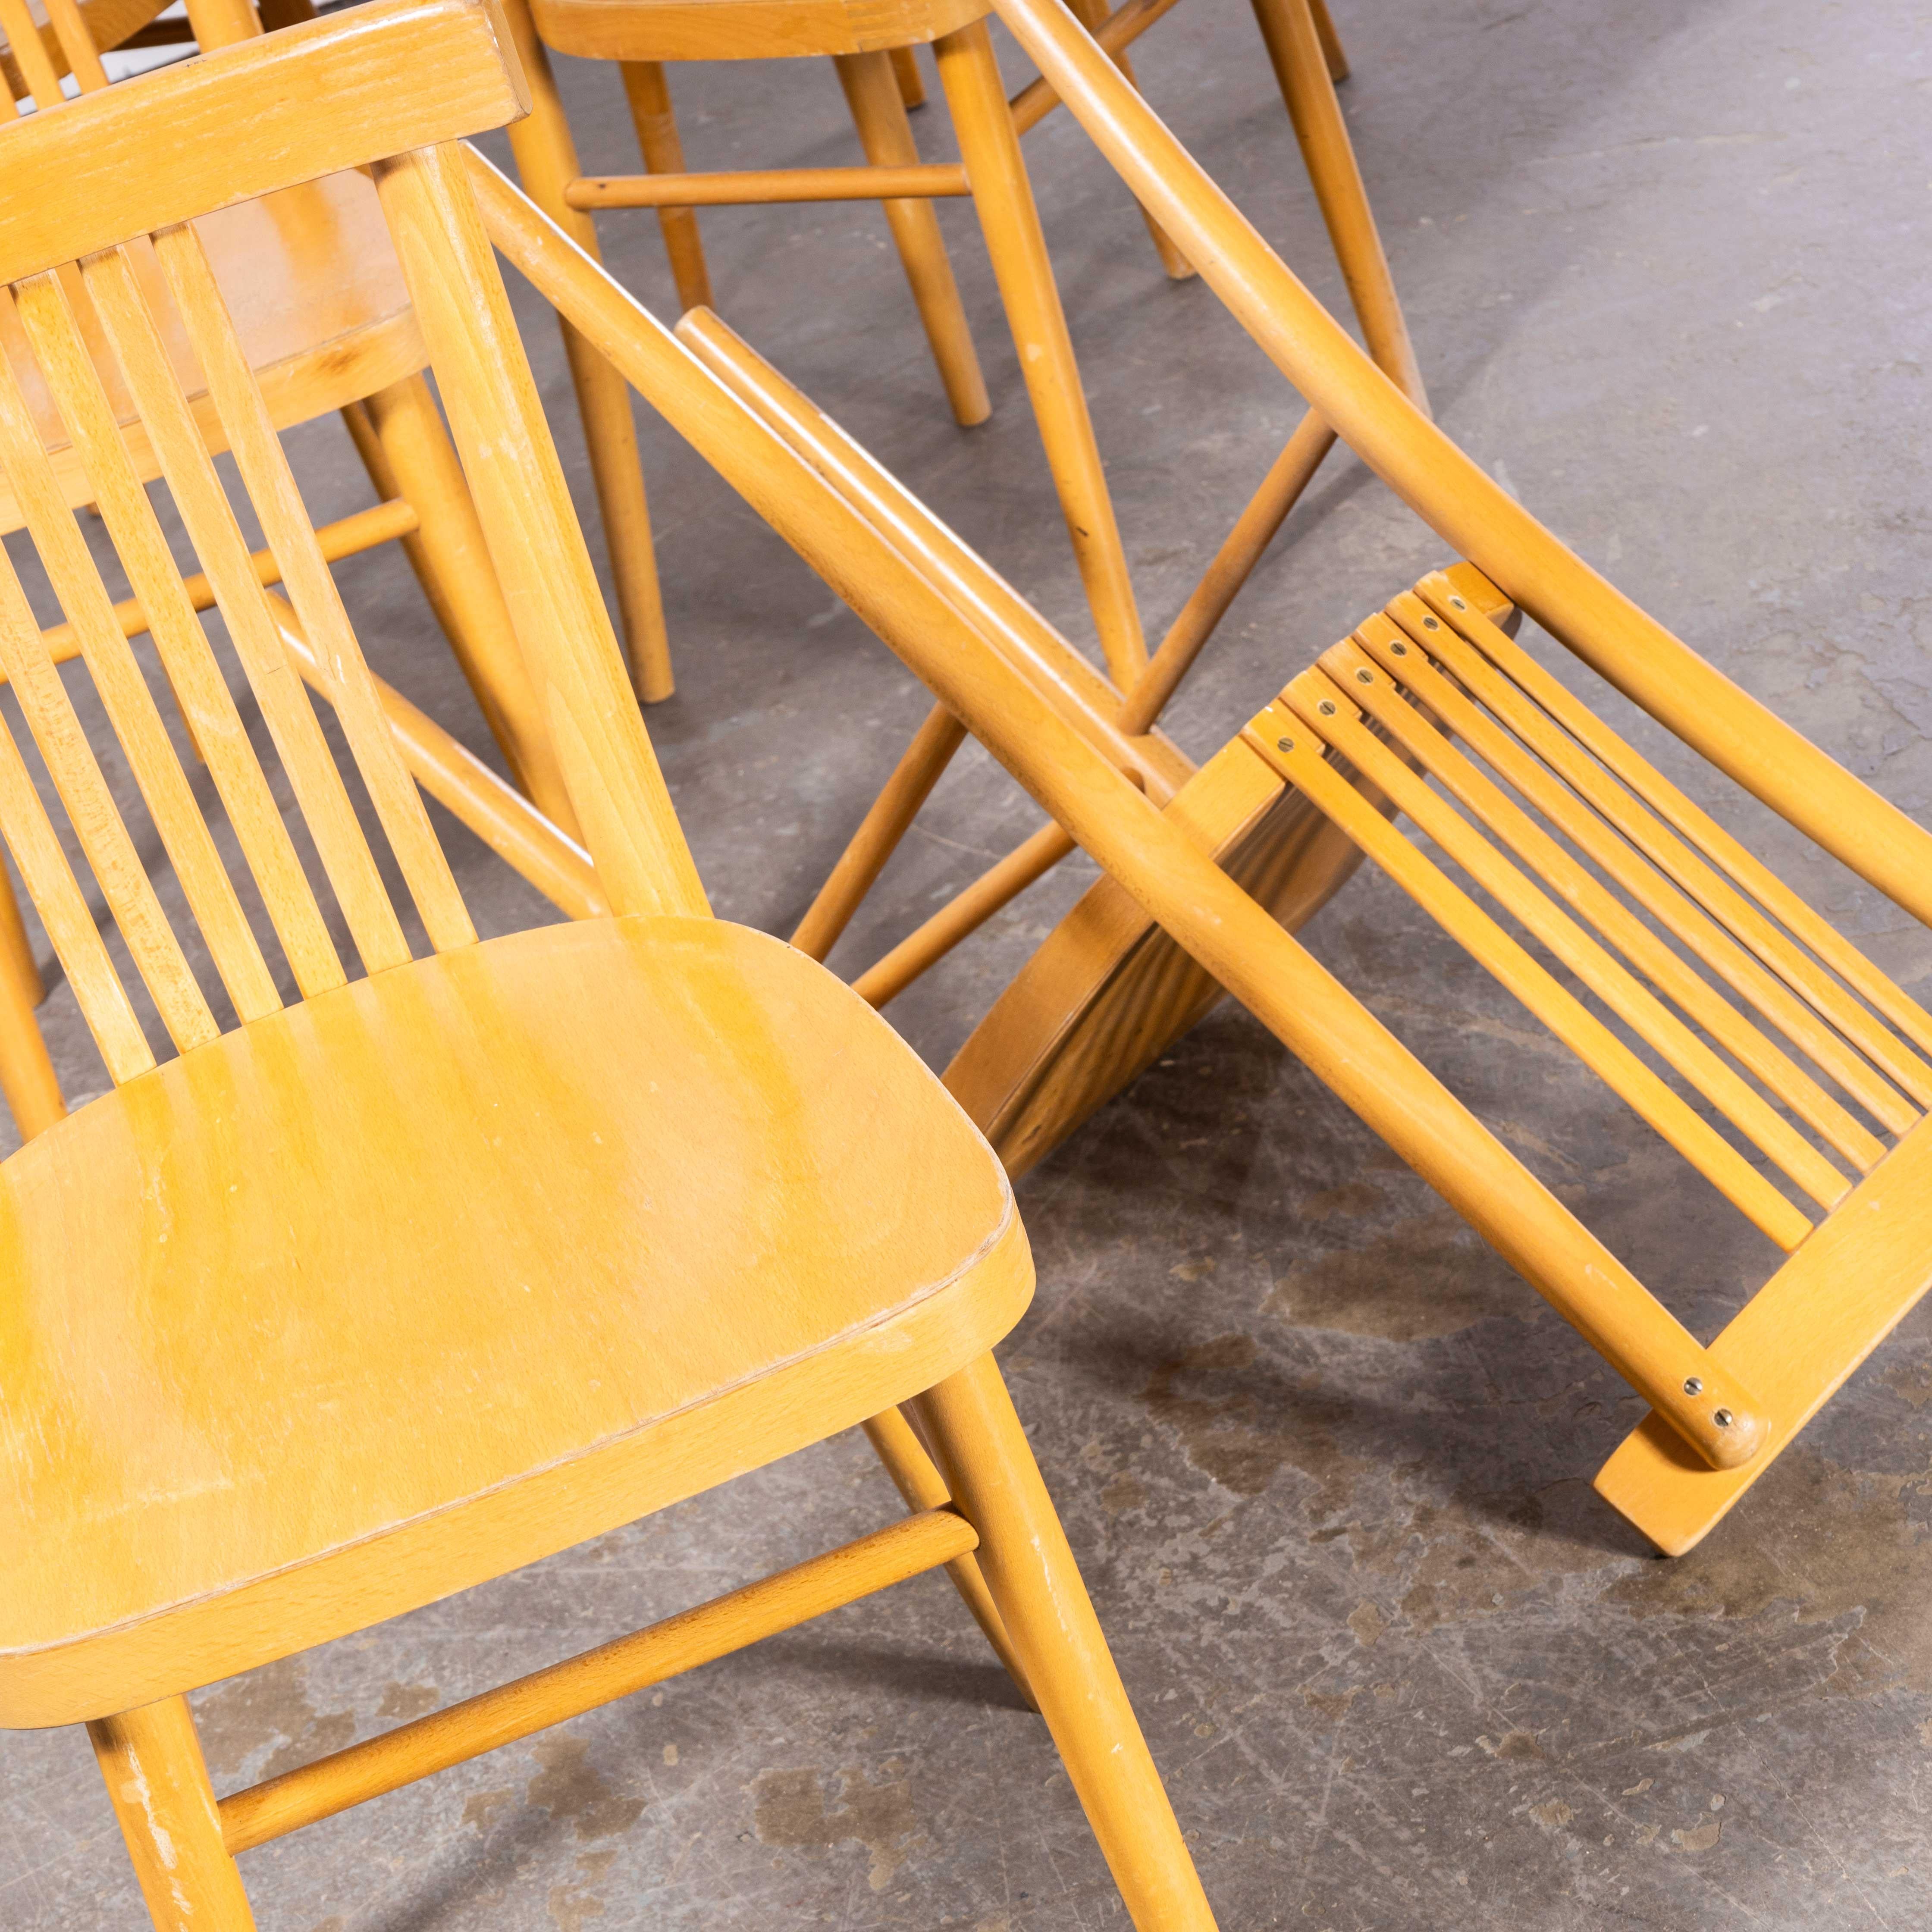 1960’s Blonde Bentwood Dining Chair By Ton – Set Of Nine
1960’s Blonde Bentwood Dining Chair By Ton – Set Of Nine. These chairs were produced by the famous Czech firm Ton, still trading today and producing beautiful chairs, they are an offshoot of